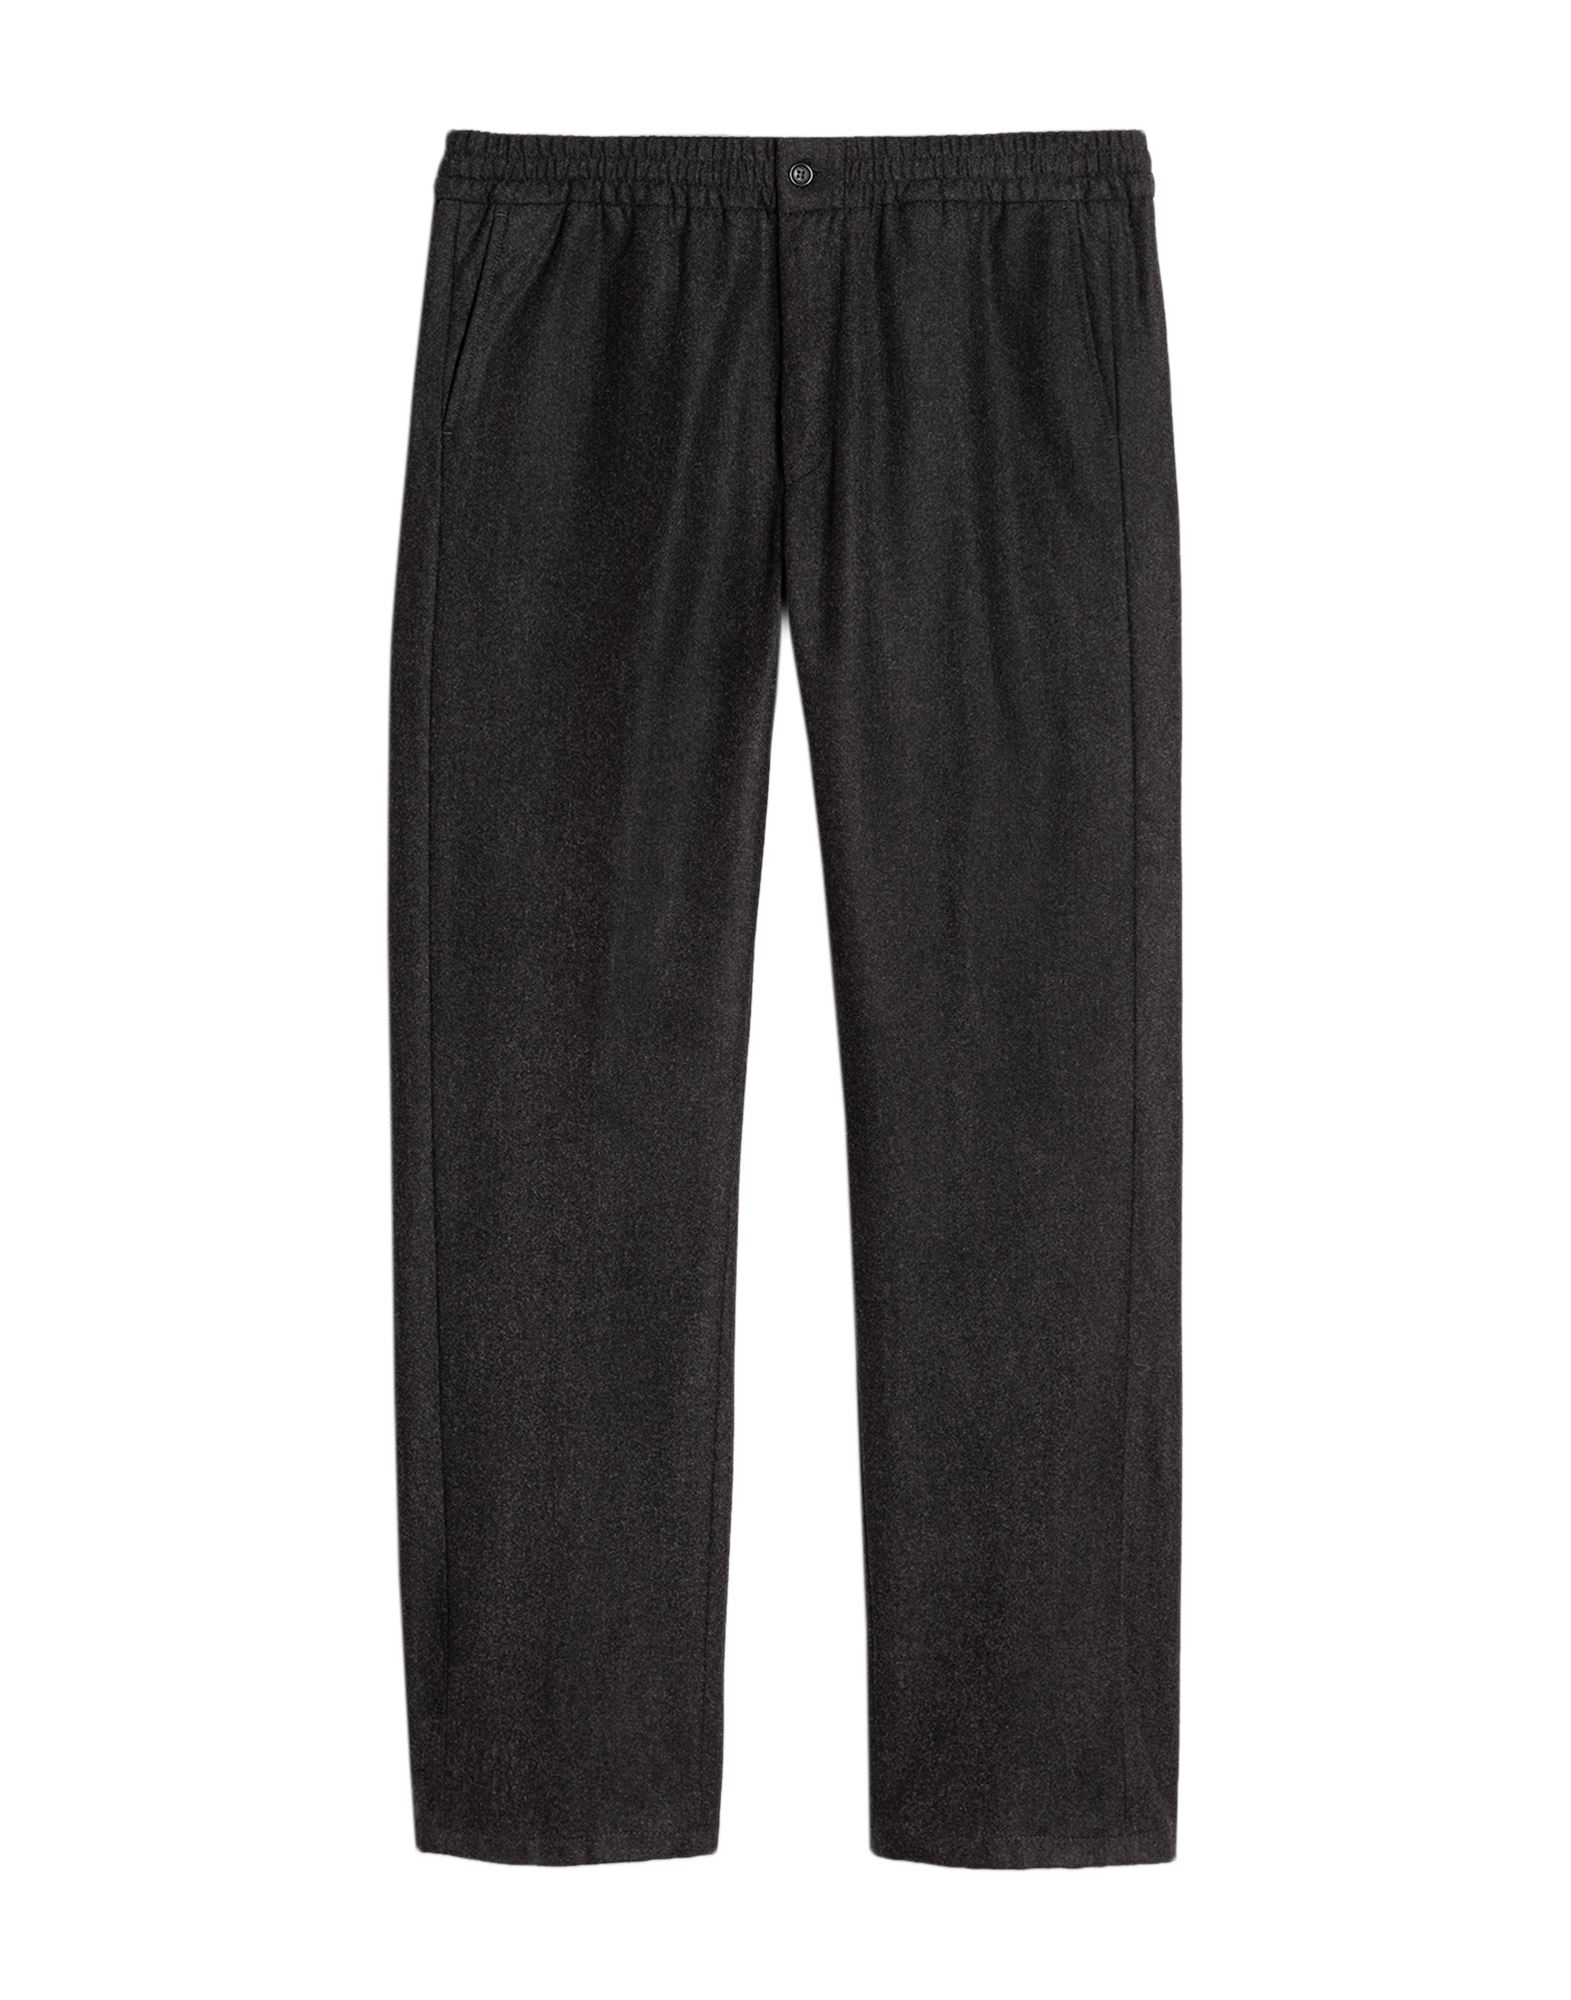 Dunhill Pants In Steel Grey